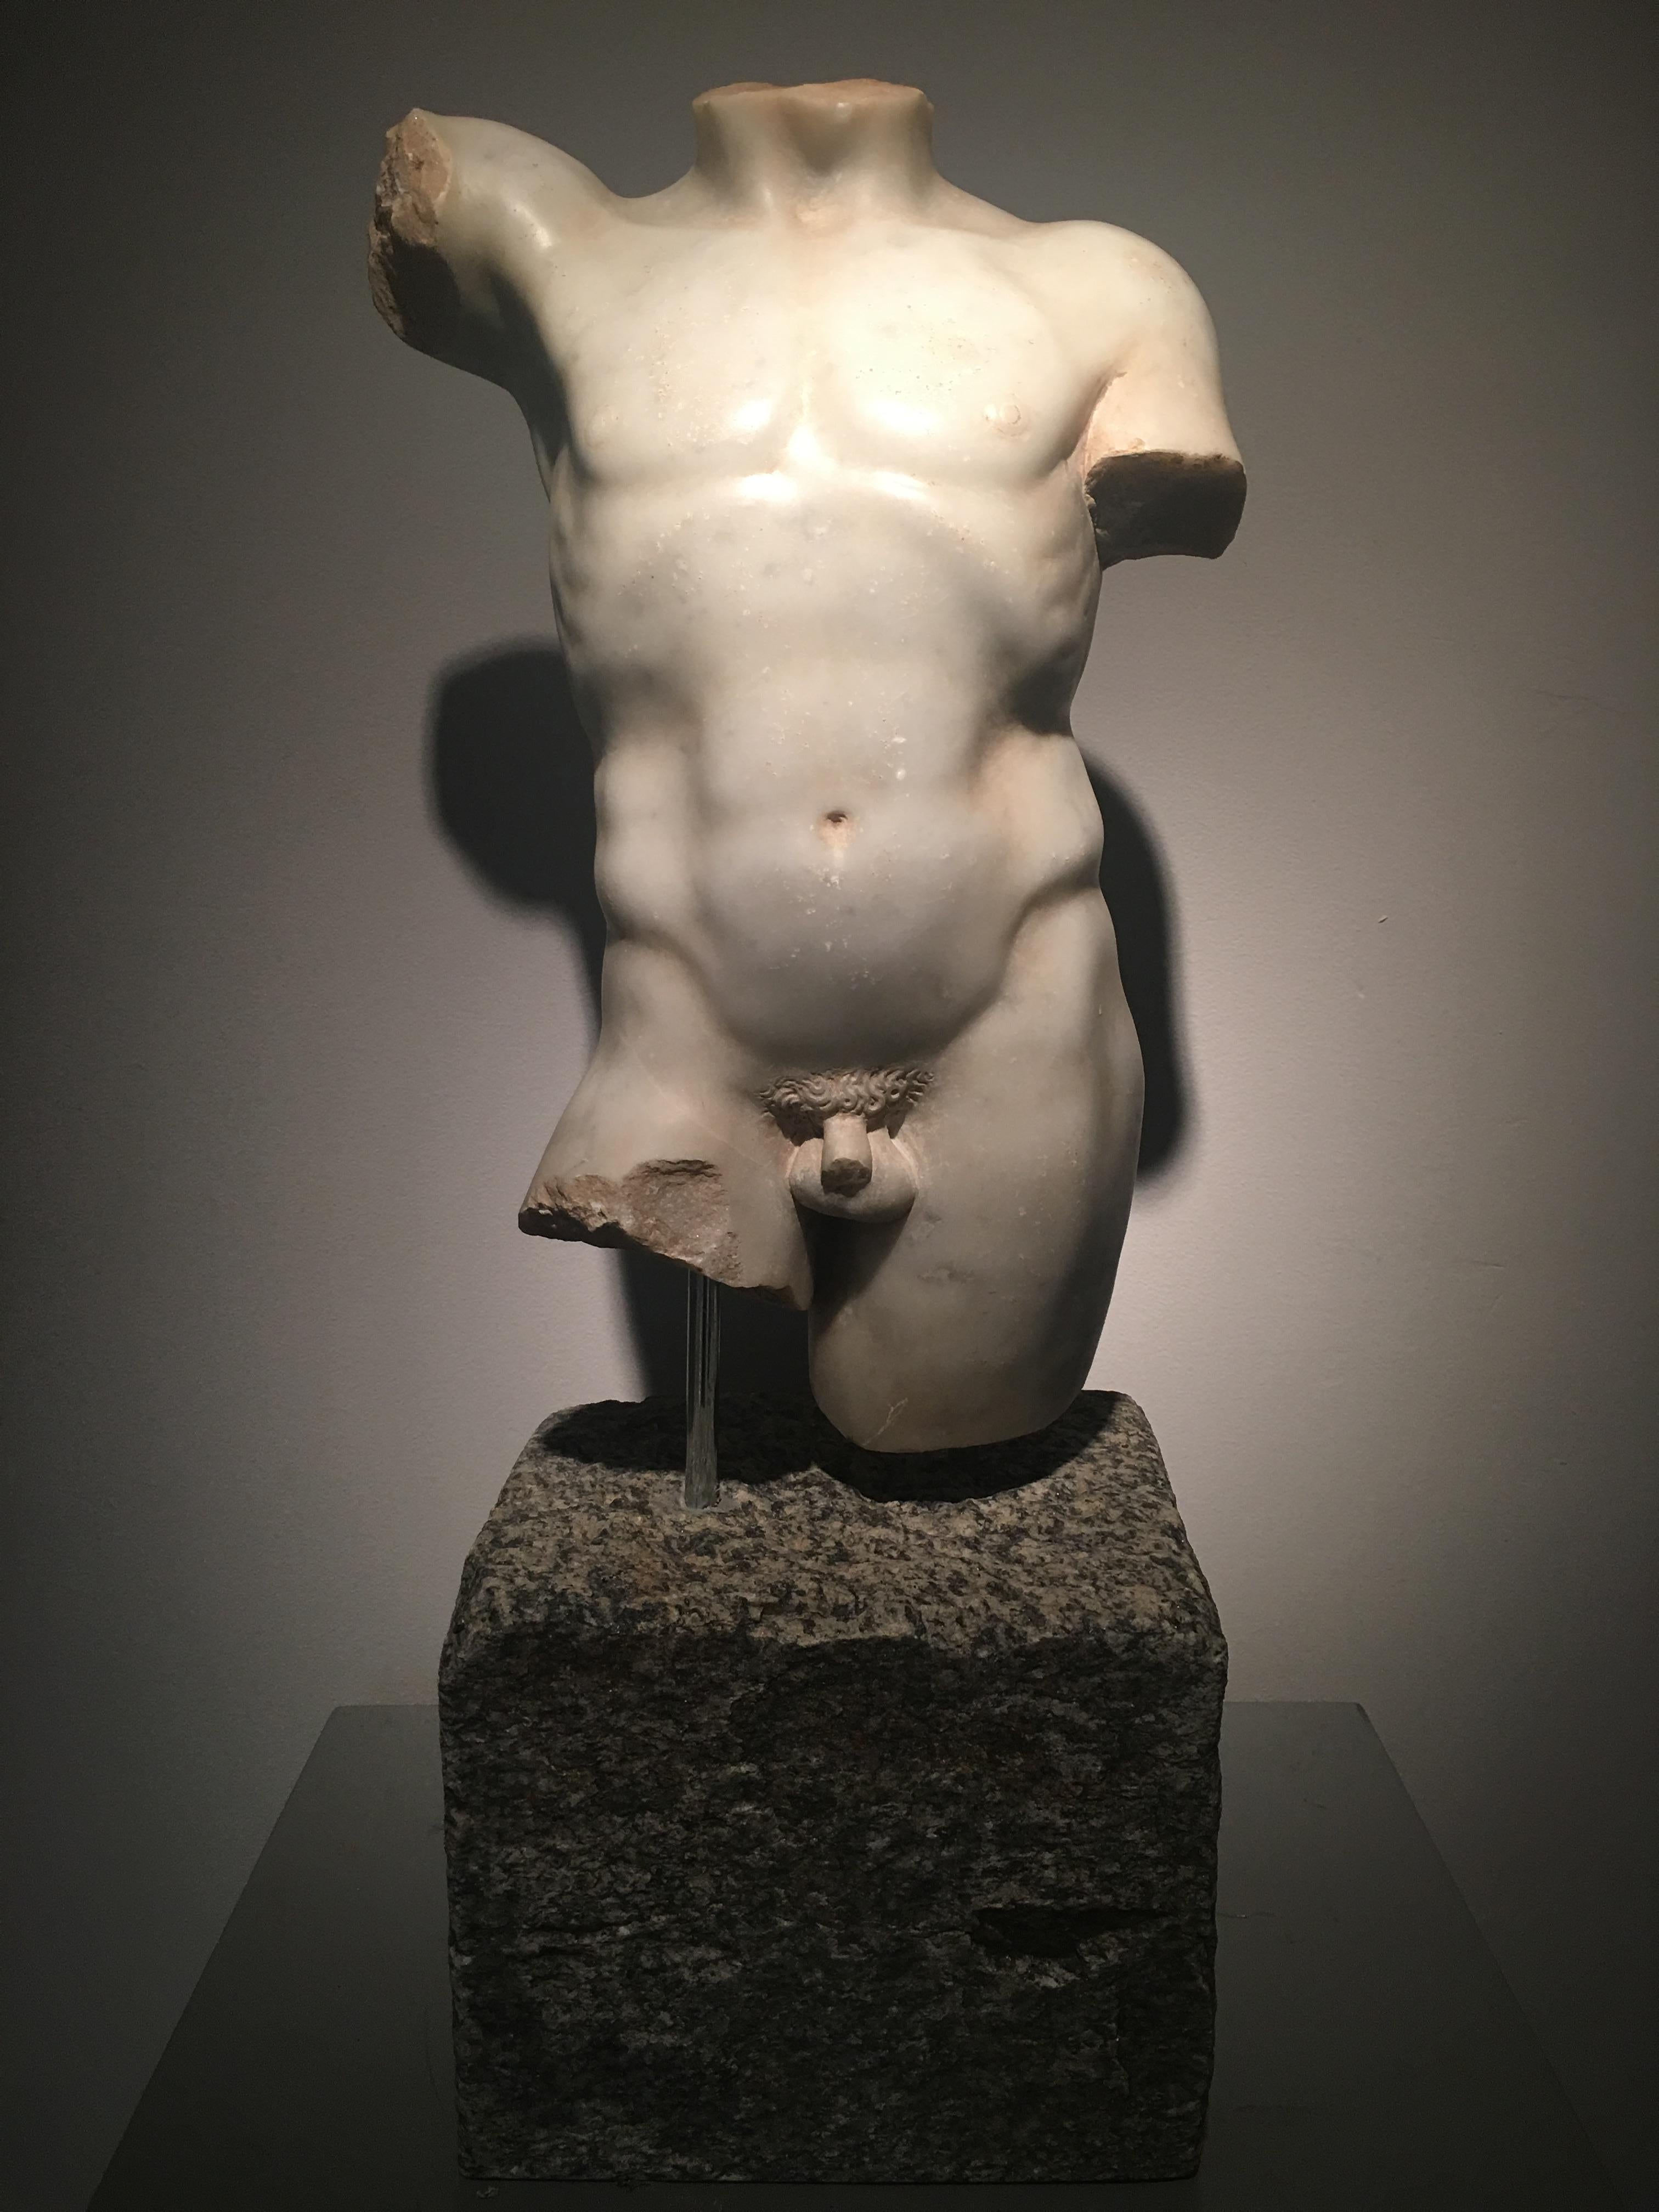 An antique Greek style fragmentary male torso in the Polykleitan tradition, from mid-leg to shoulders, depicting an adolescent male athlete with defined musculature and hairless. He stands contrapposto with the weight on his left leg.

The present